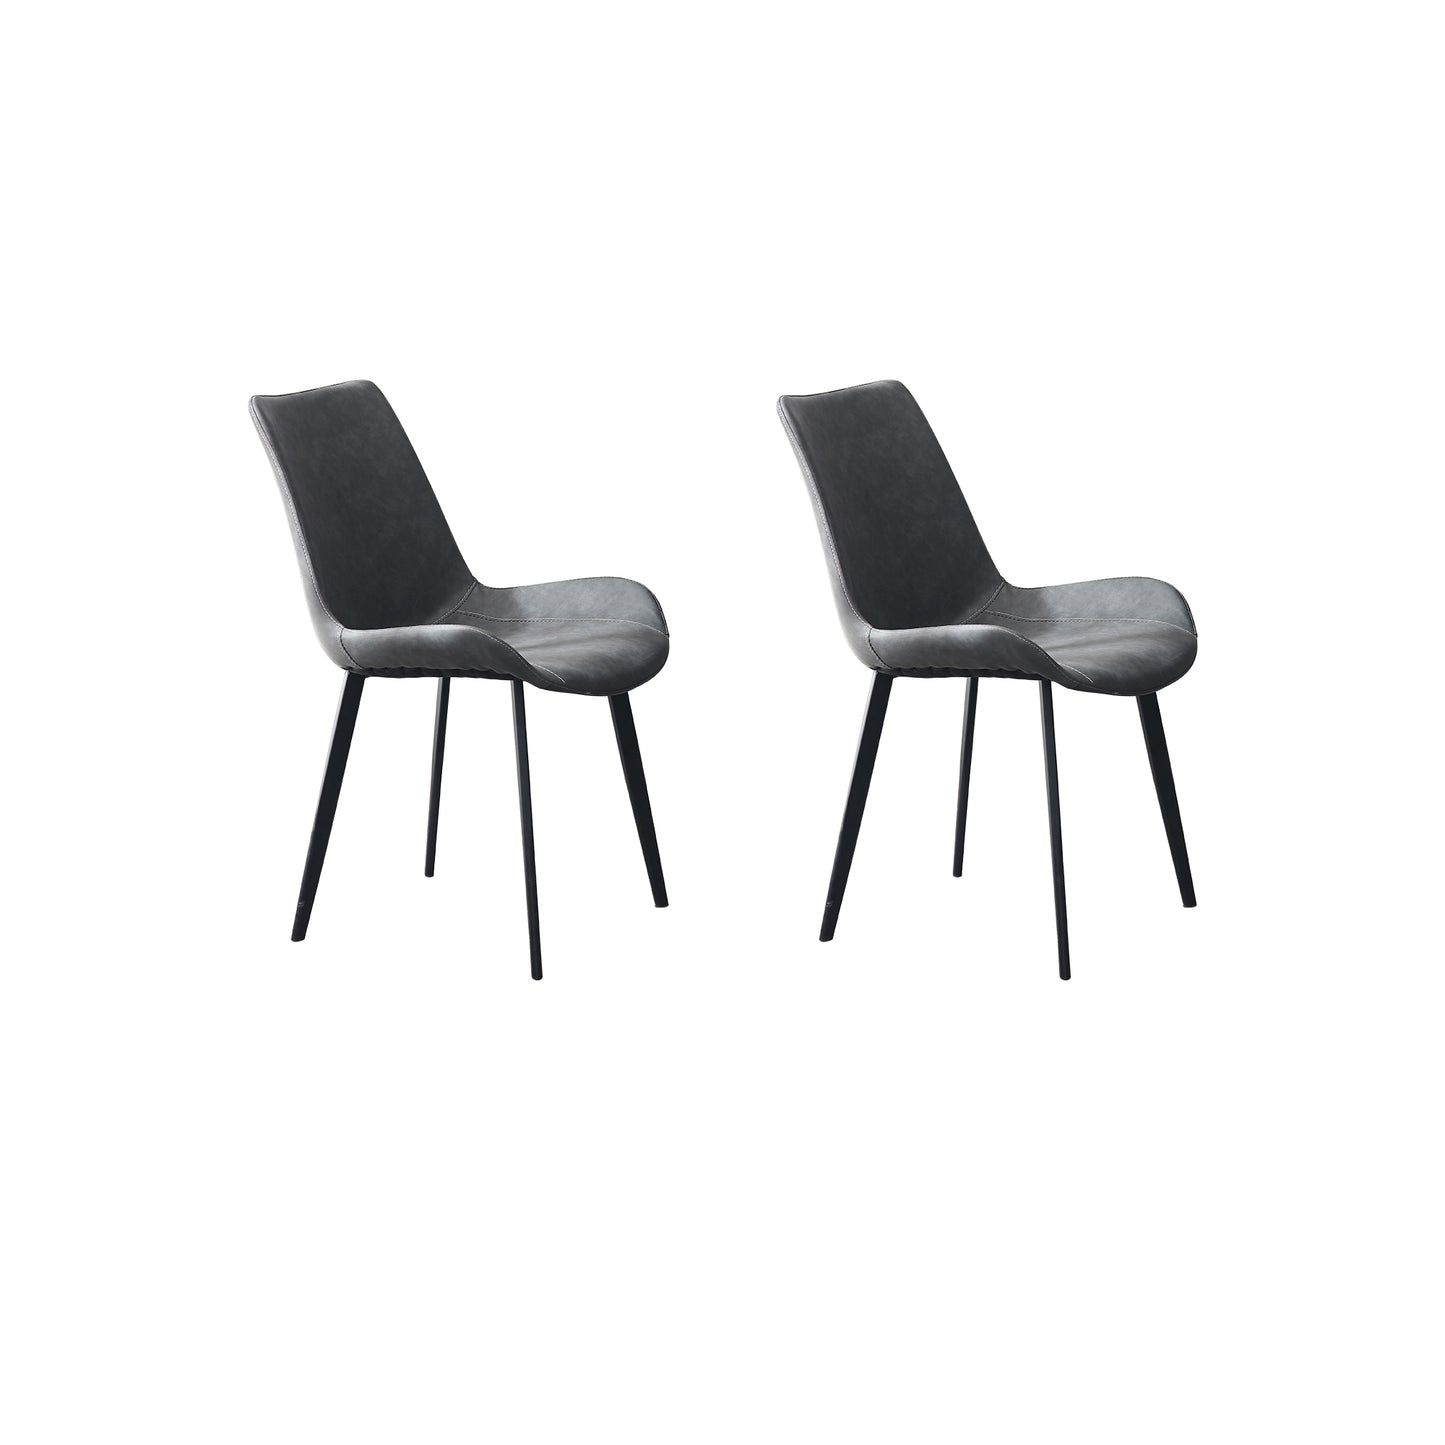 Deep Gray Dining Chairs Set of 2 with PU Leather Upholstery & High Back Dining Table Chair